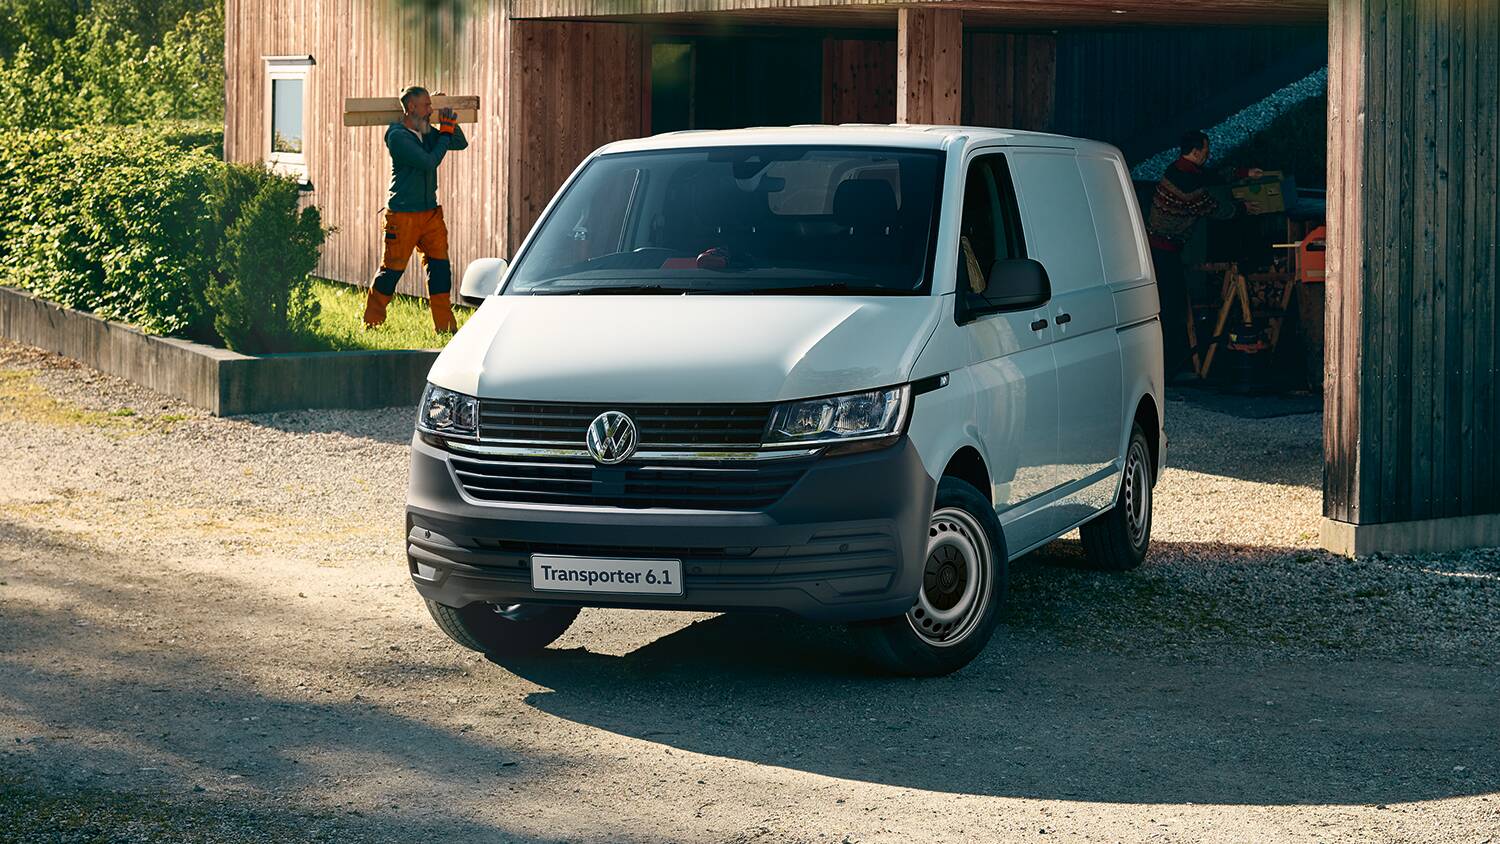 Next VW Transporter to use Ford platform, offer electric power – report, The Examiner